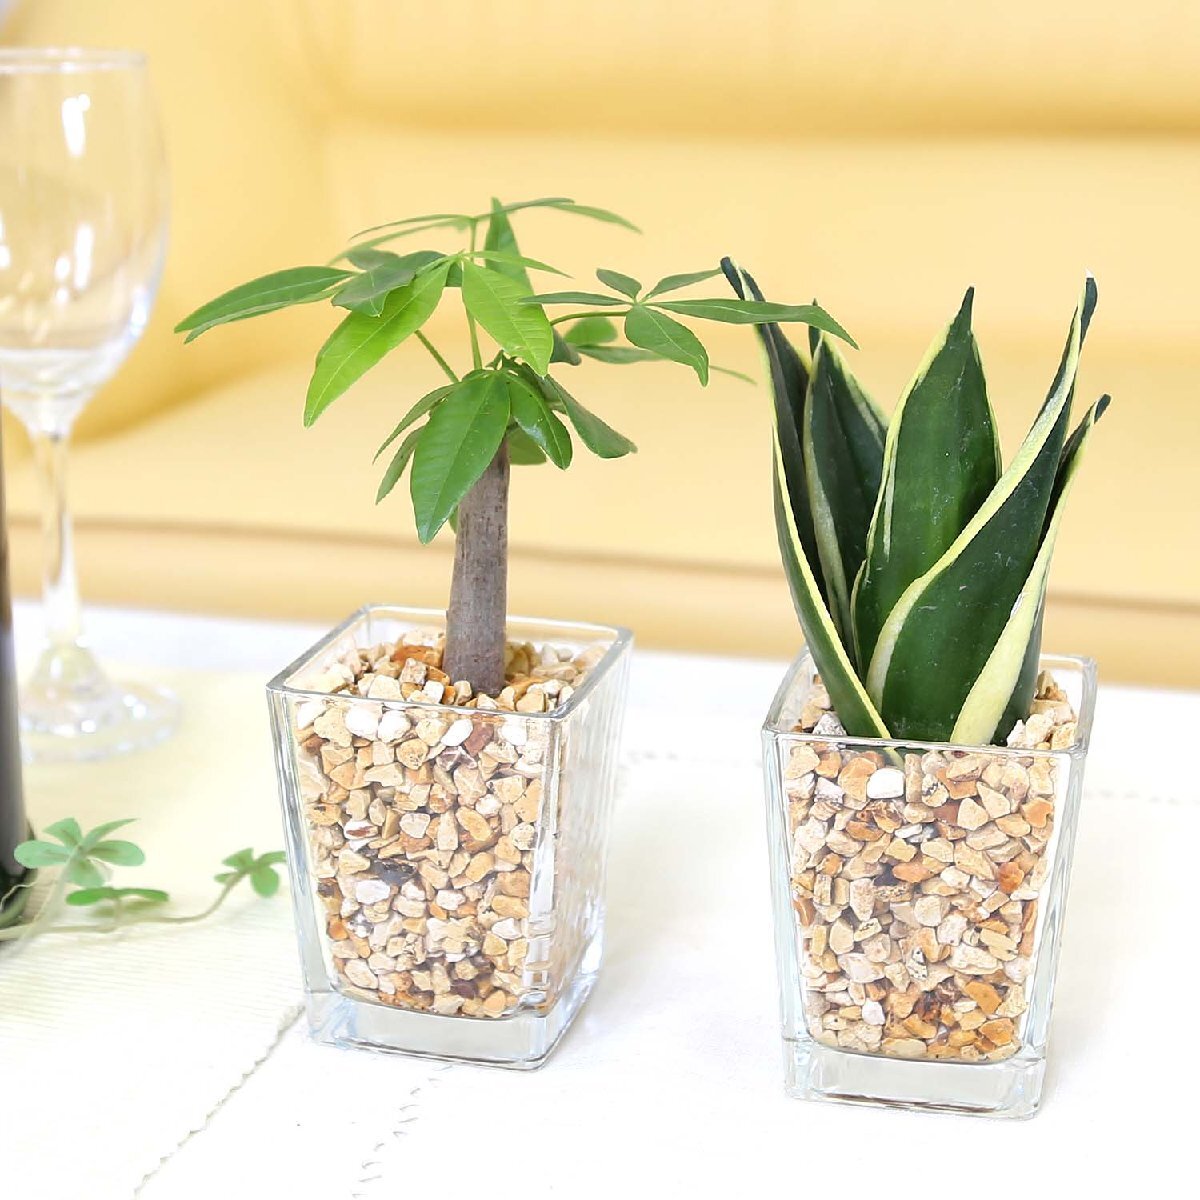  earth . used without clean feeling exist zeo light ... Mini decorative plant A type pakira & sansevieria 2 pot set hydroculture 